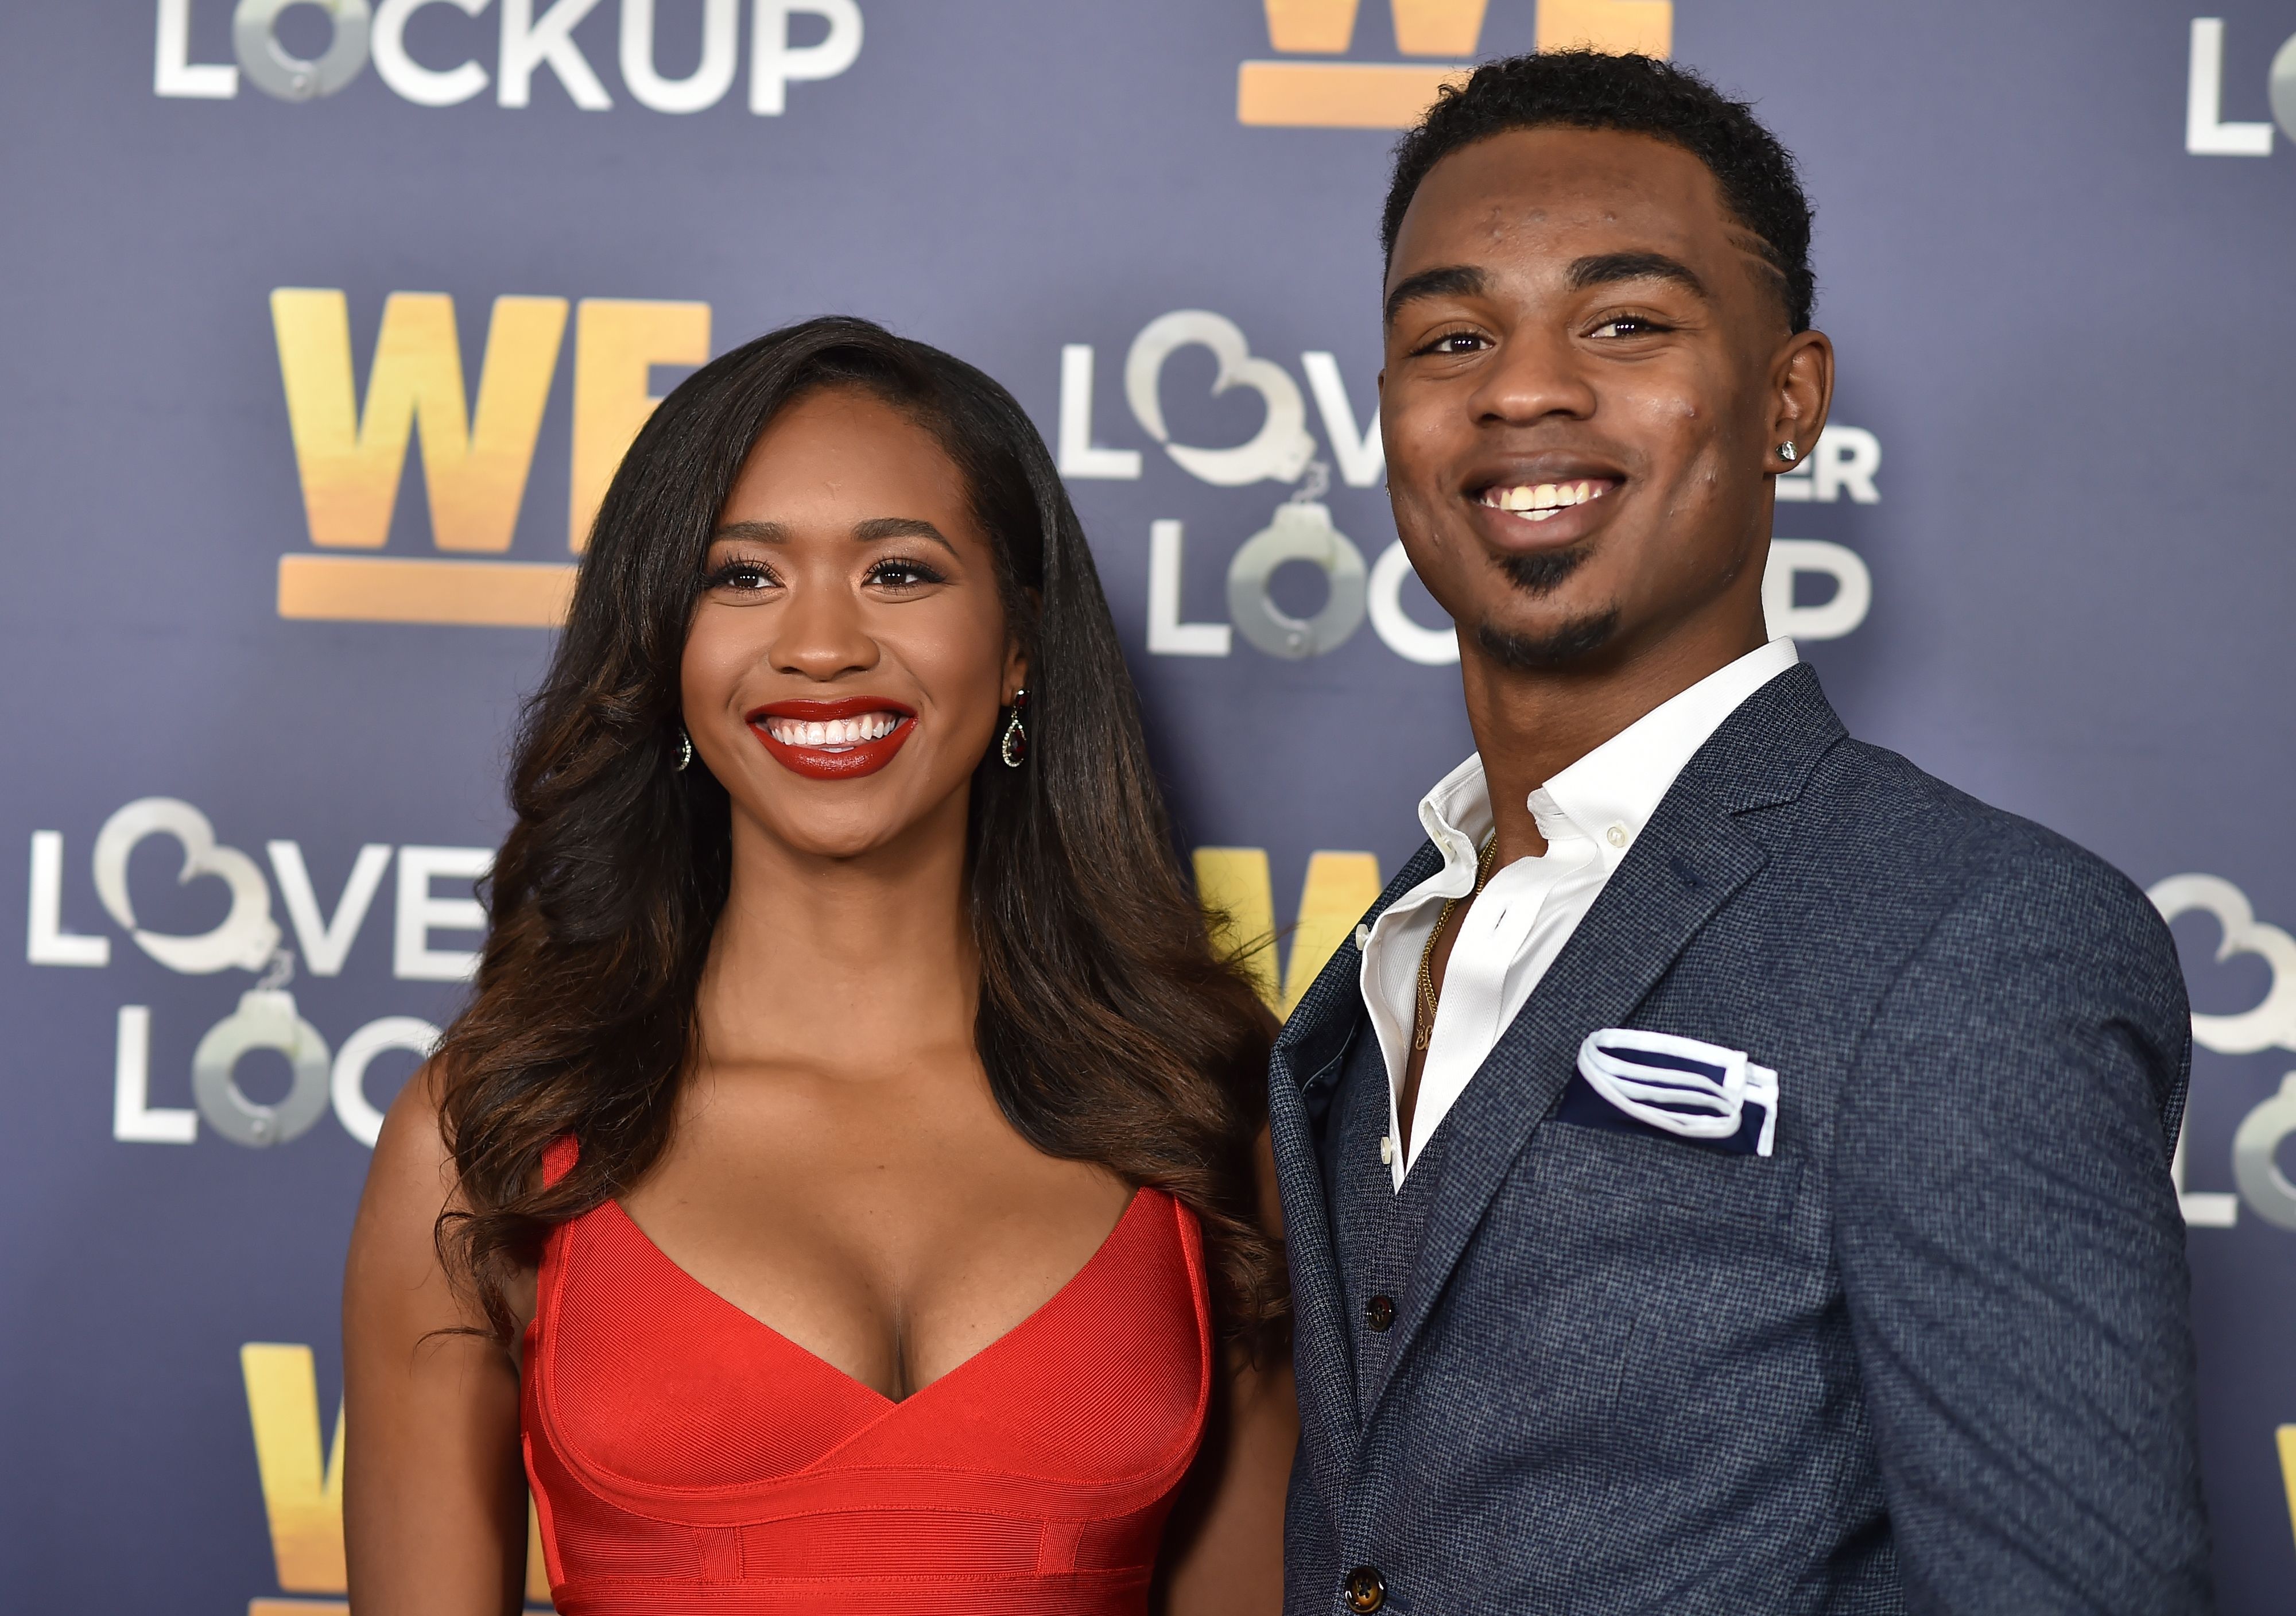 Reality television stars Chris "Swaggy C" Williams and Bayleigh Dayton smiling at 'Love After Lockup' premiere